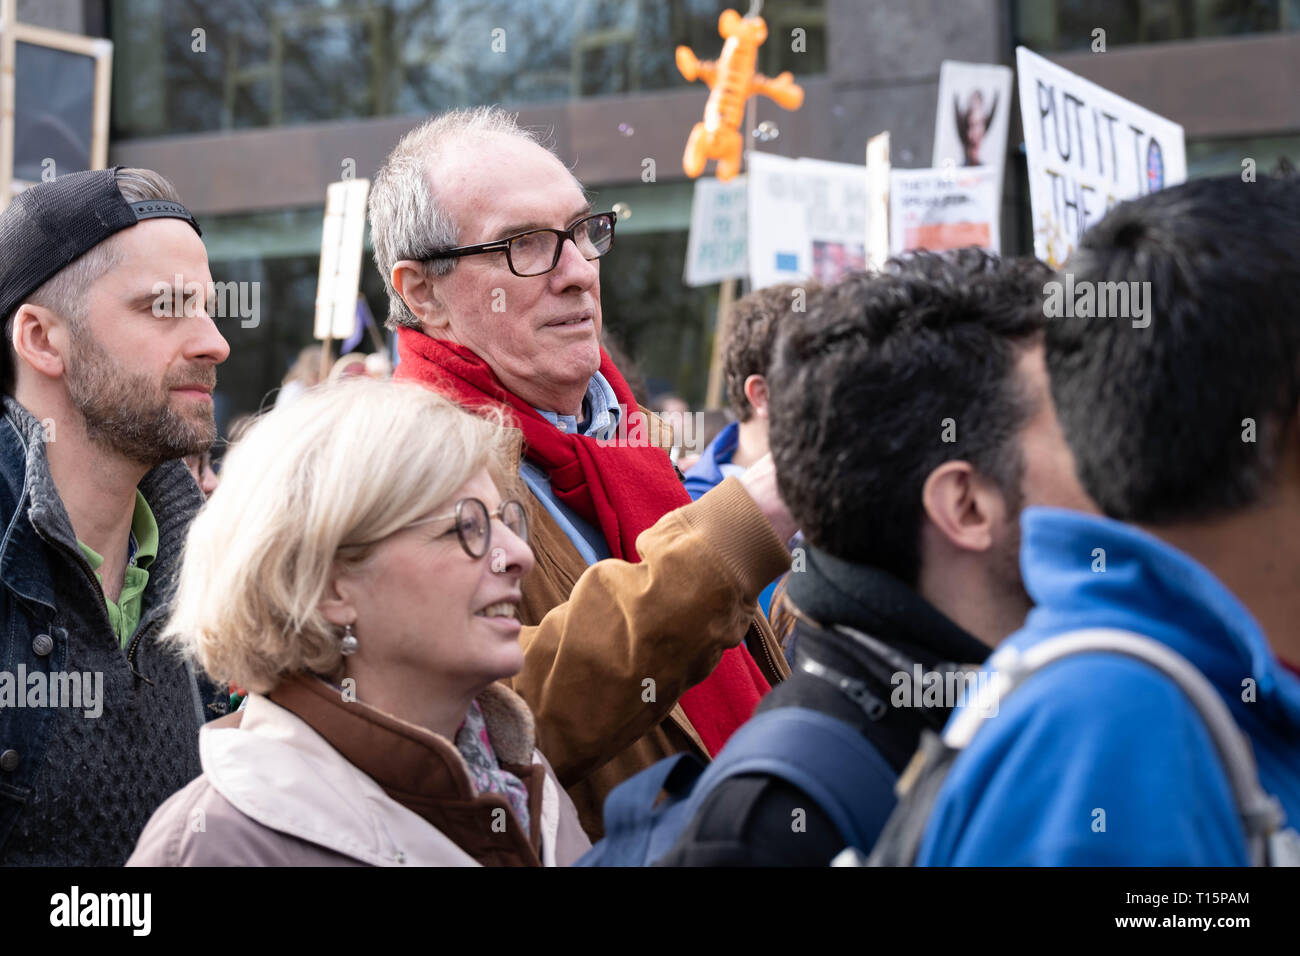 London, UK. 23rd Mar, 2019. Will Hutton attending Peoples vote March, London, 23 March 2019 Credit: Chris Moos/Alamy Live News Stock Photo